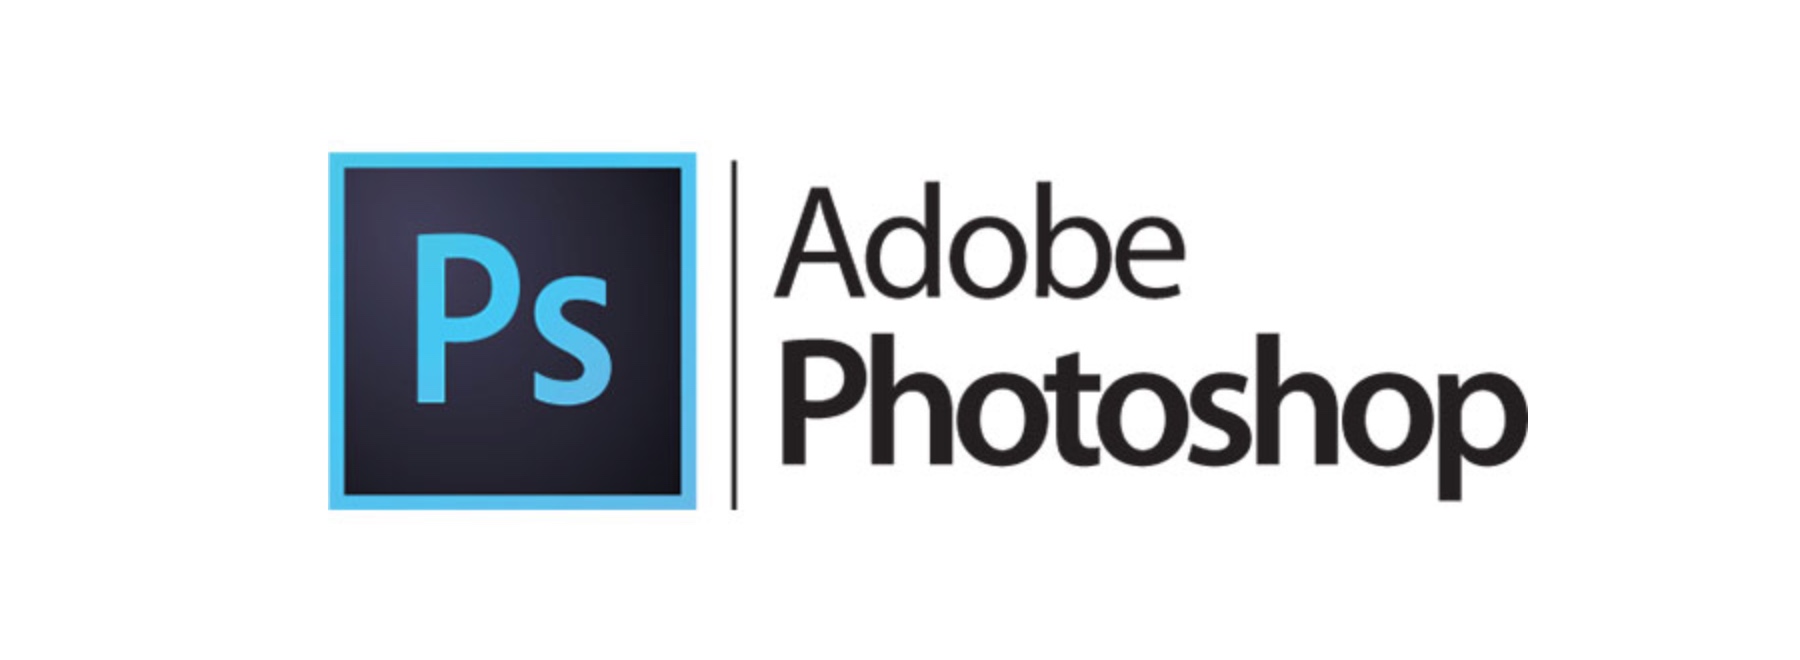 30 Years Of Adobe Photoshop Design History 101 Images Version Museum